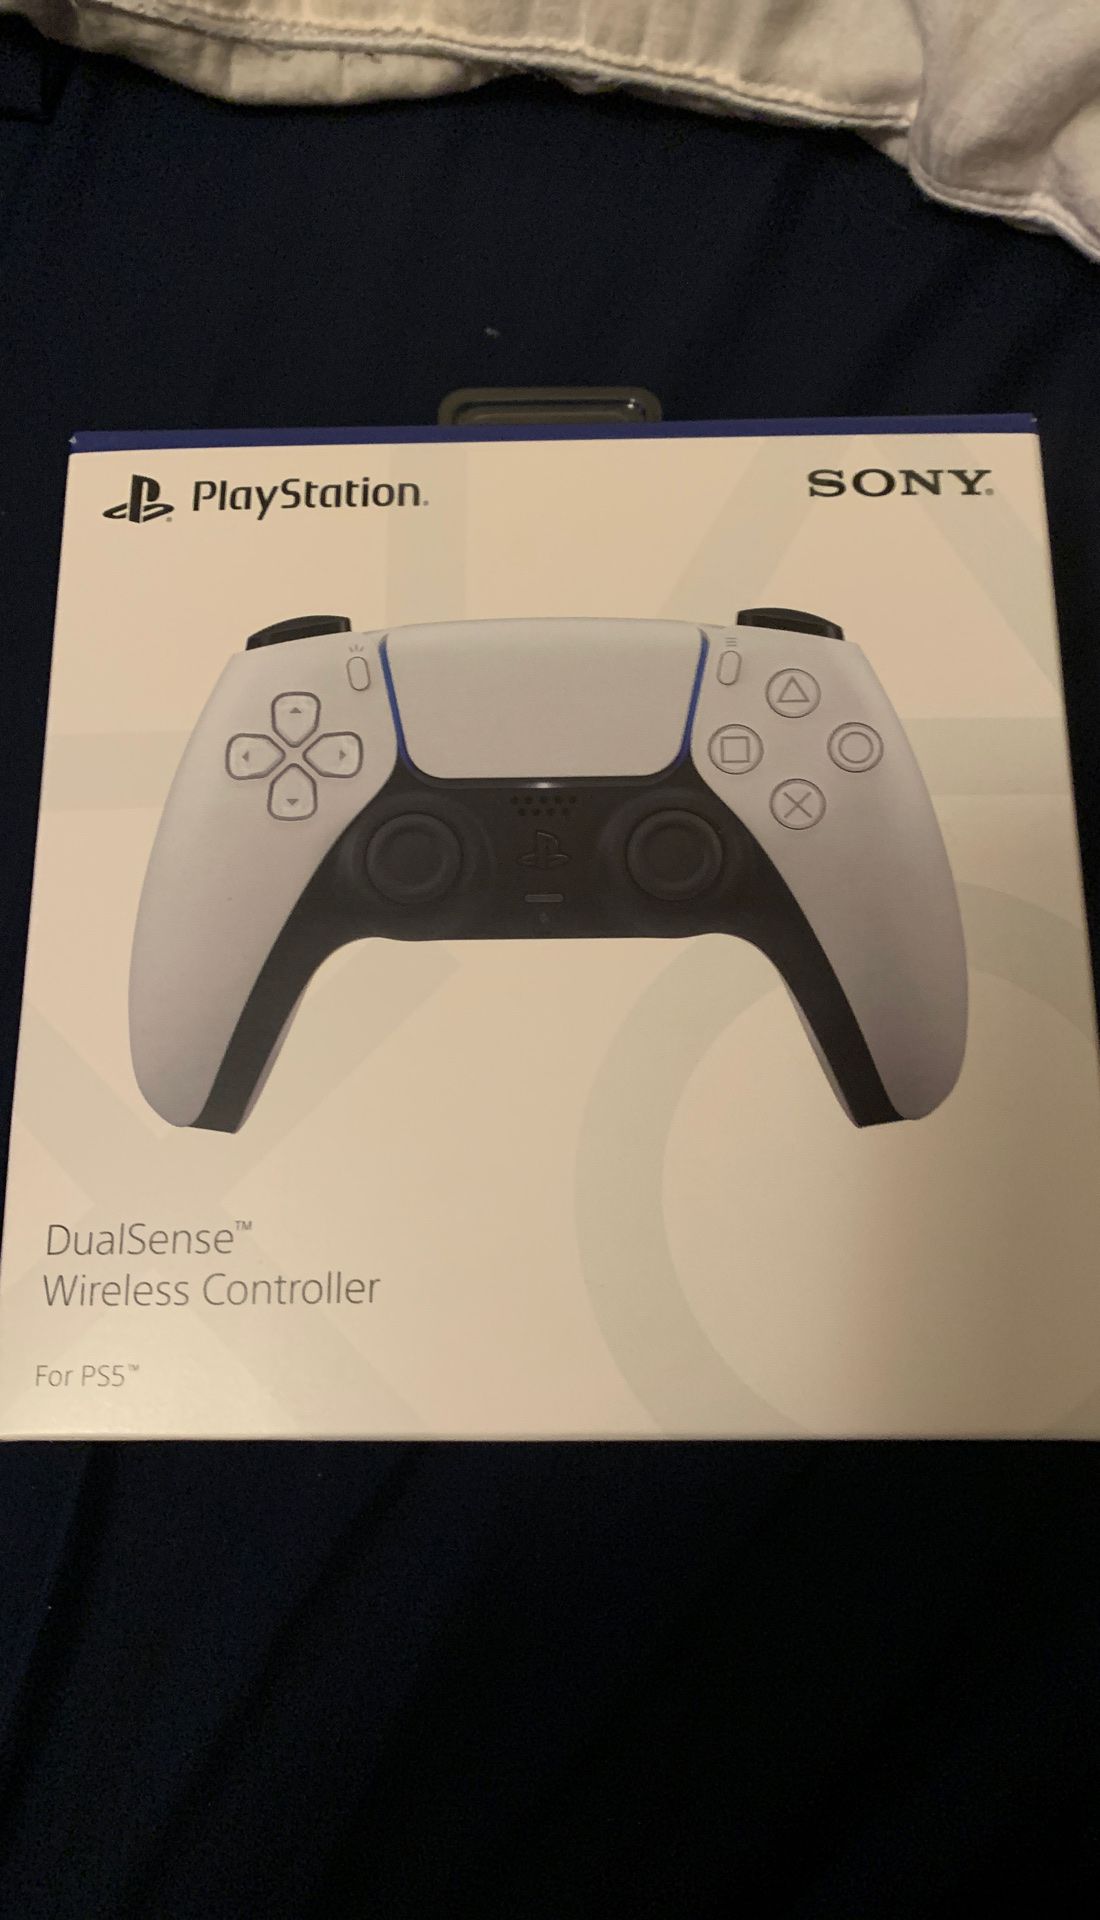 Sony PlayStation Portal Remote Player Controller For Your Ps5 System BRAND  NEW - SEALED - IN HAND for Sale in Scotch Plains, NJ - OfferUp